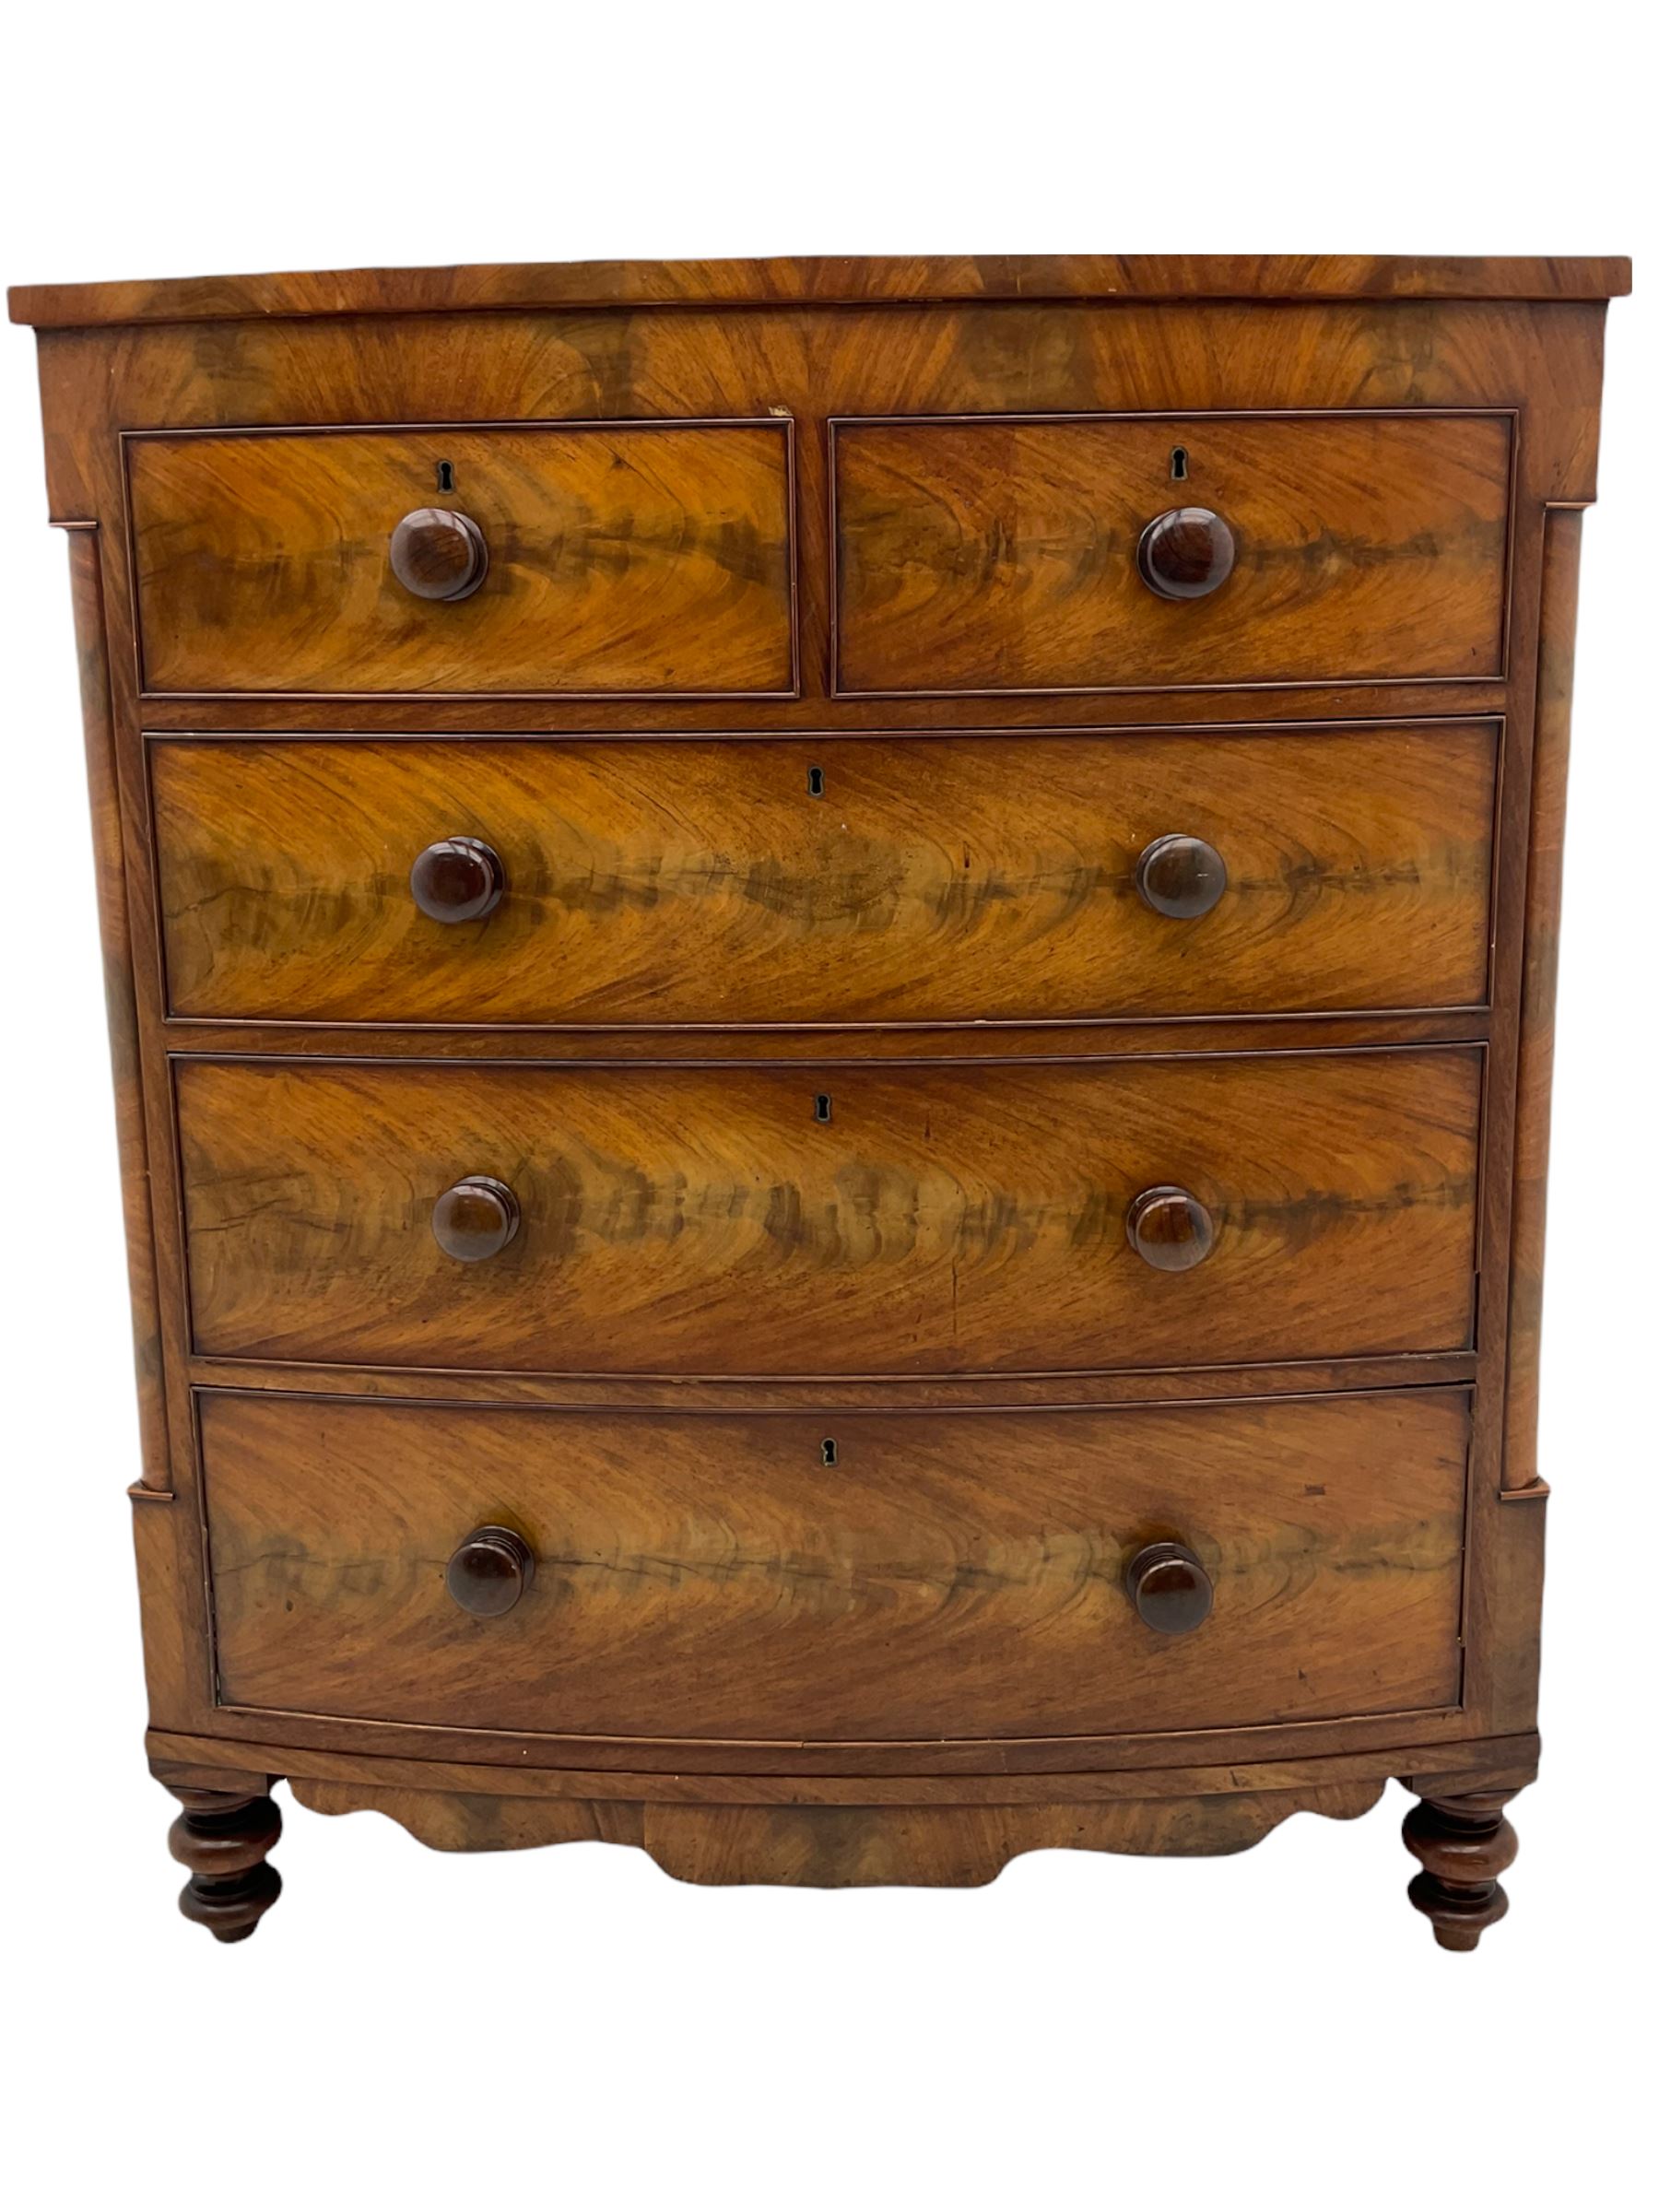 Victorian mahogany bow front chest - Image 6 of 6